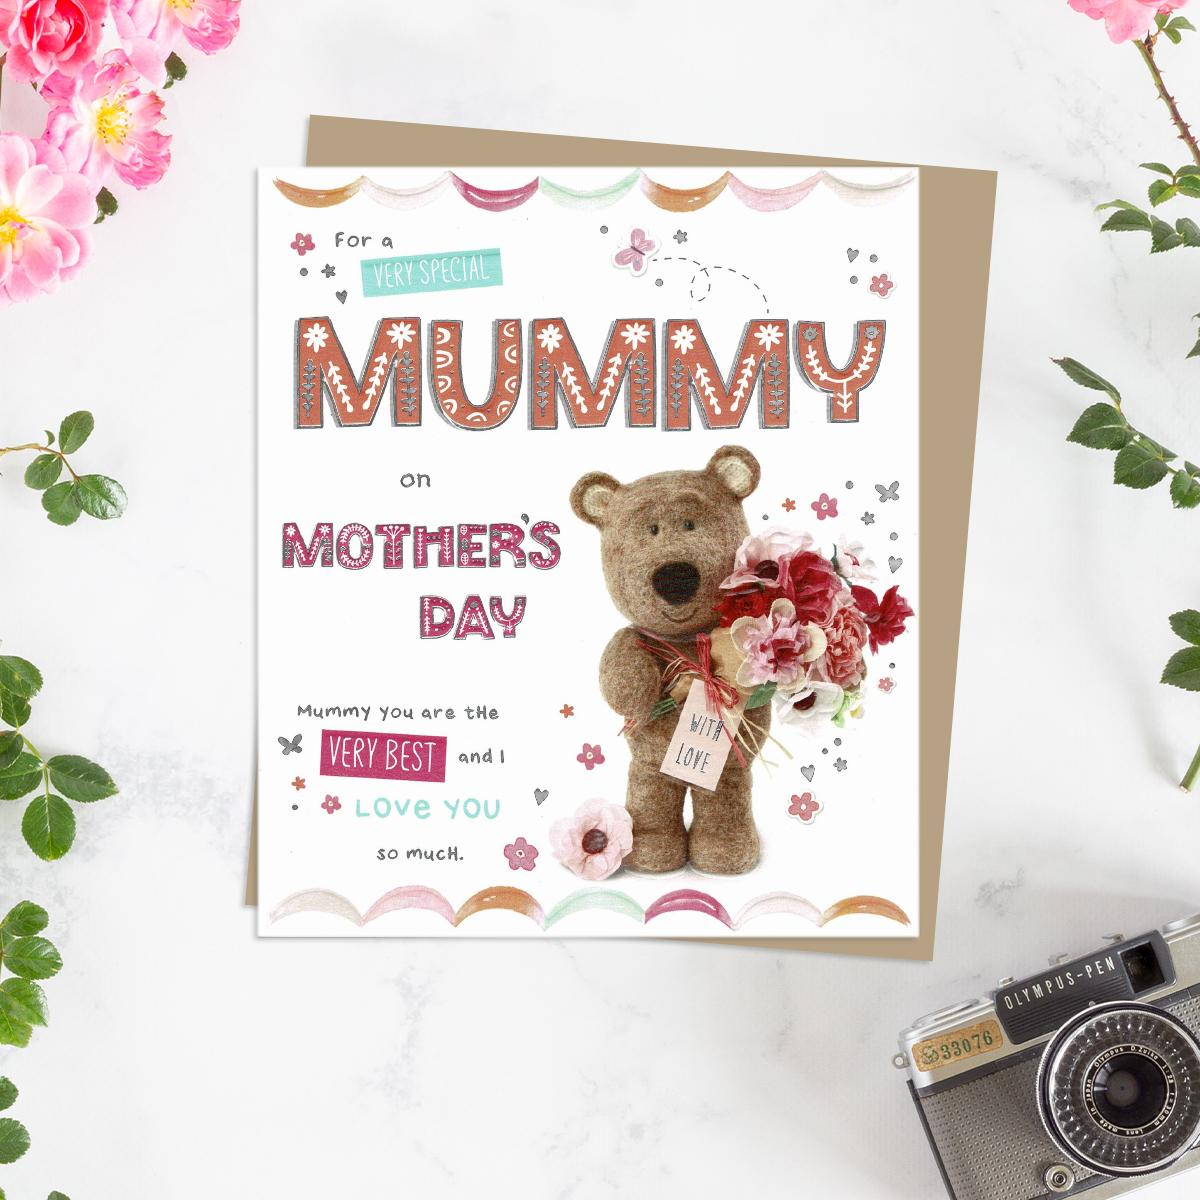 ' For A Very Special Mummy On Mother's Day' Featuring Barley Bear With Flowers! Complete With Silver Foiling Detail And Brown Envelope